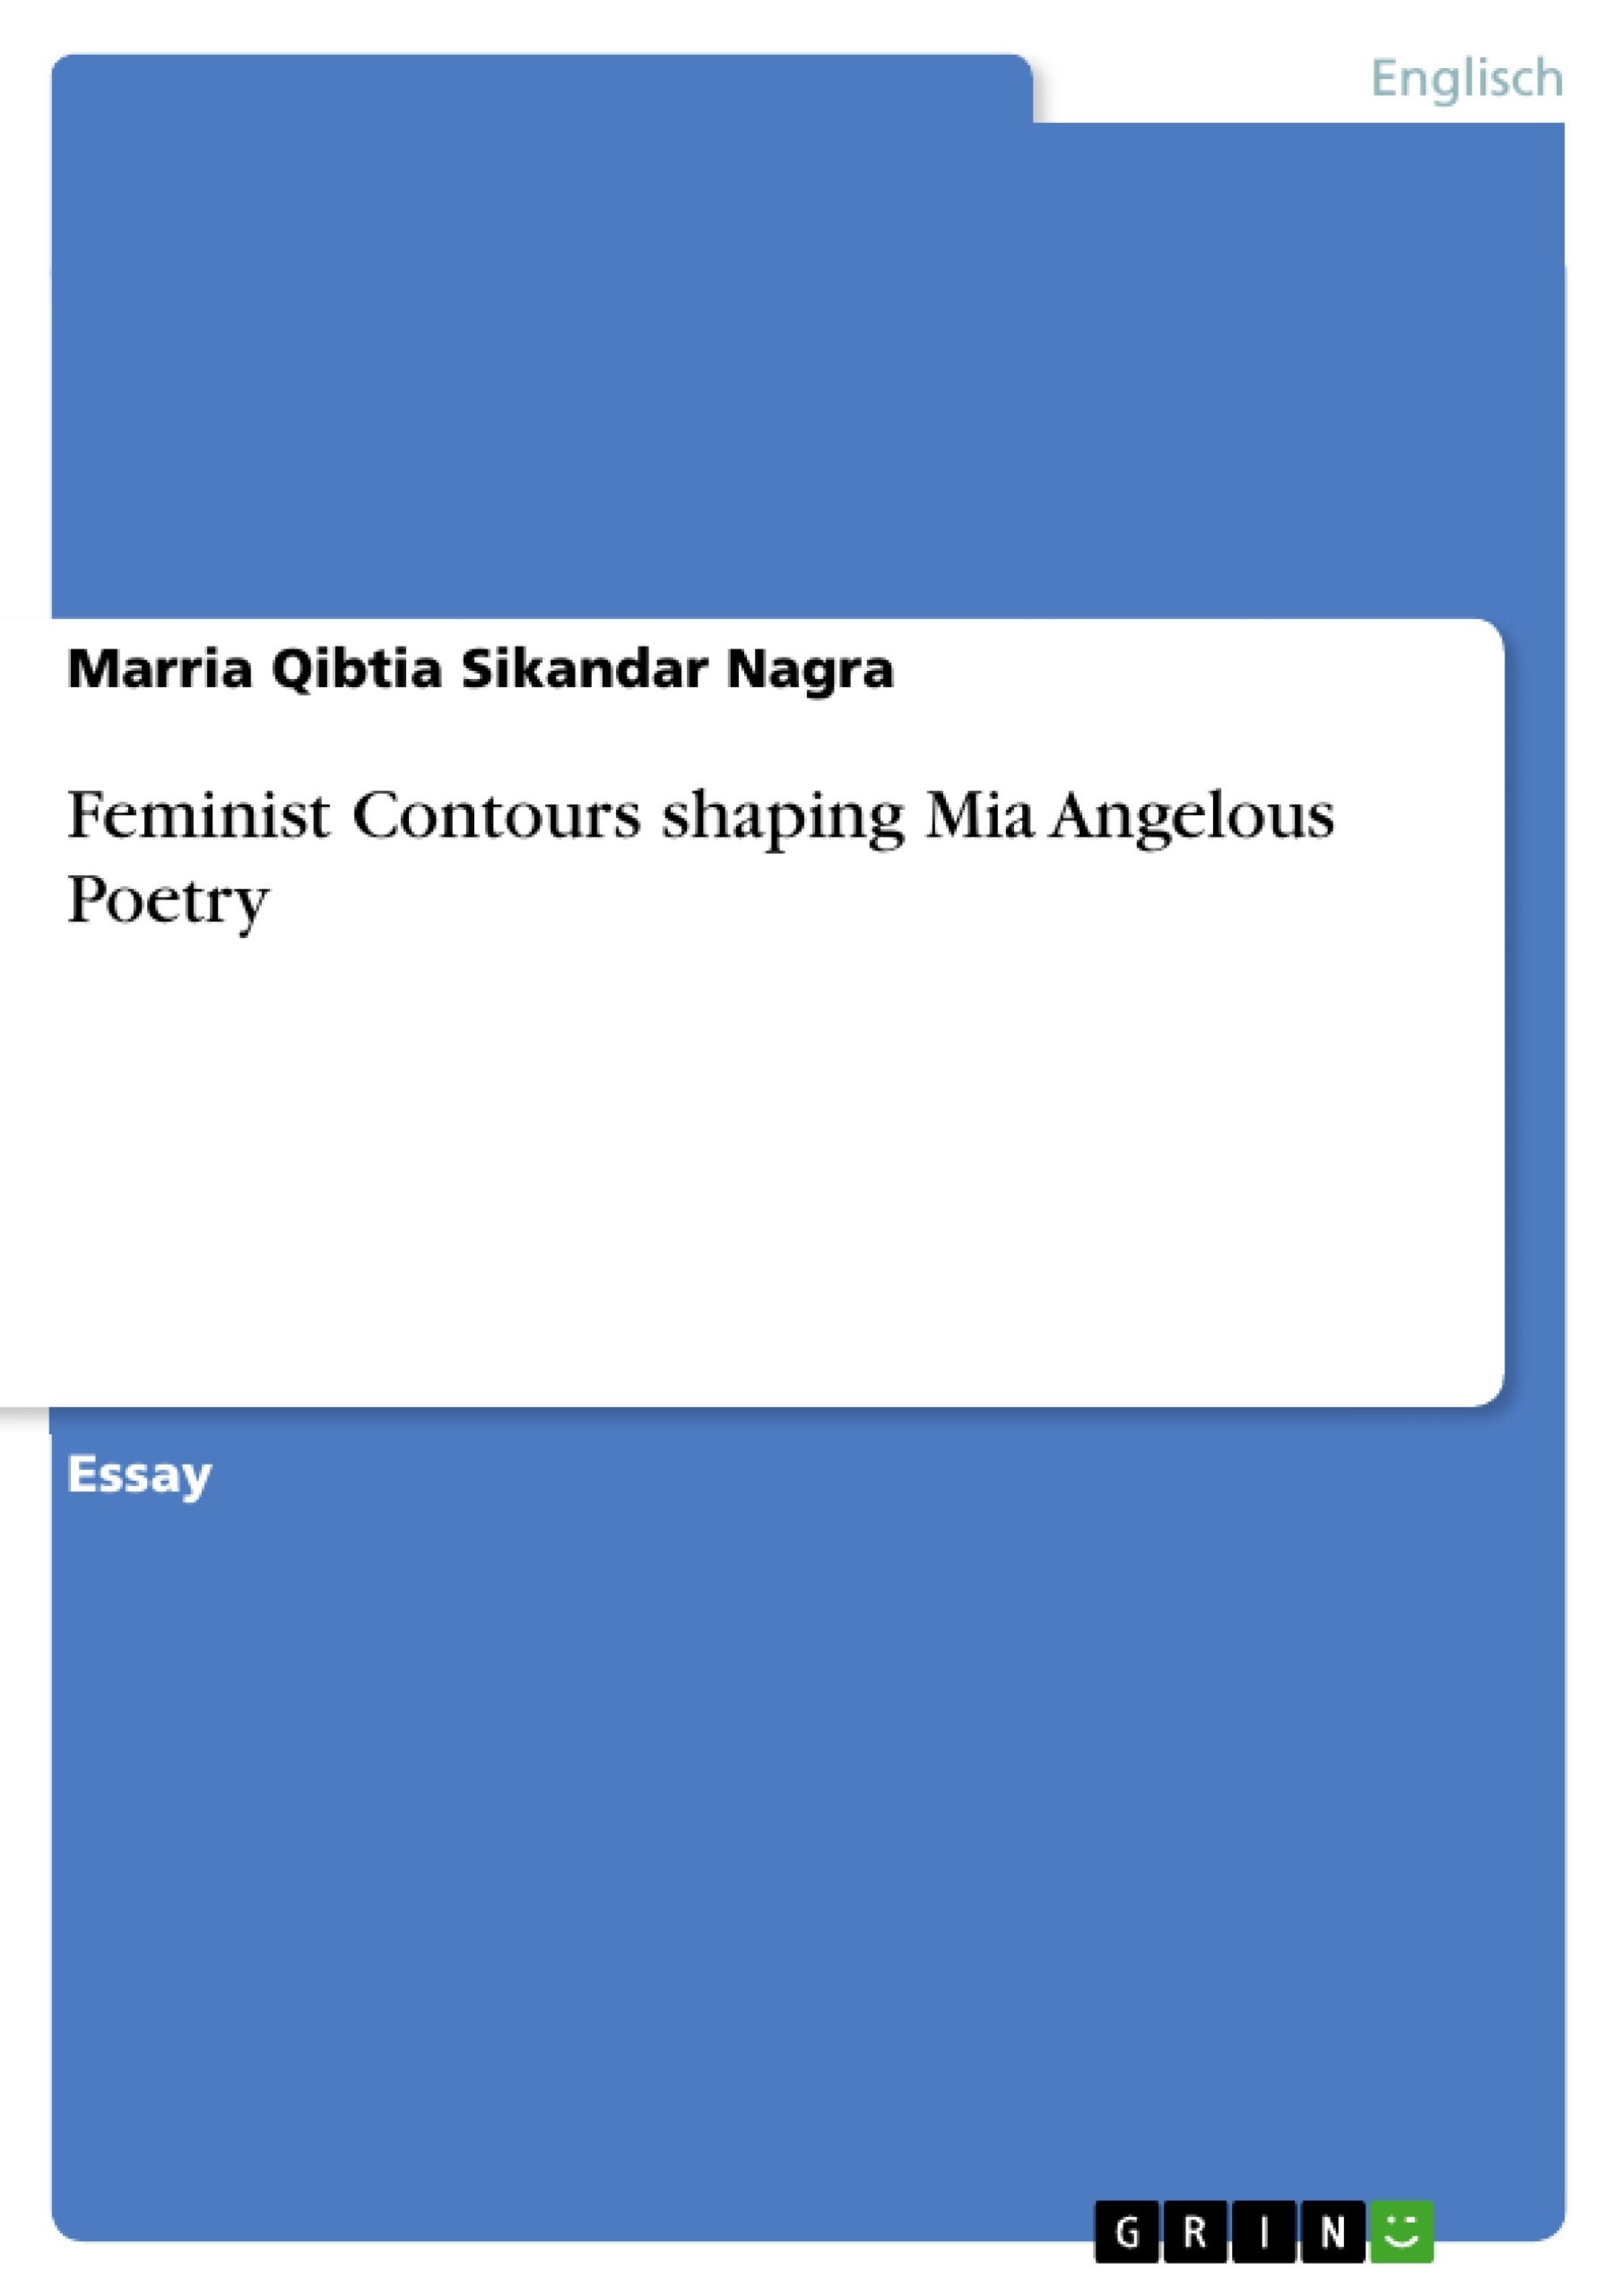 Título: Feminist Contours shaping Mia Angelous Poetry